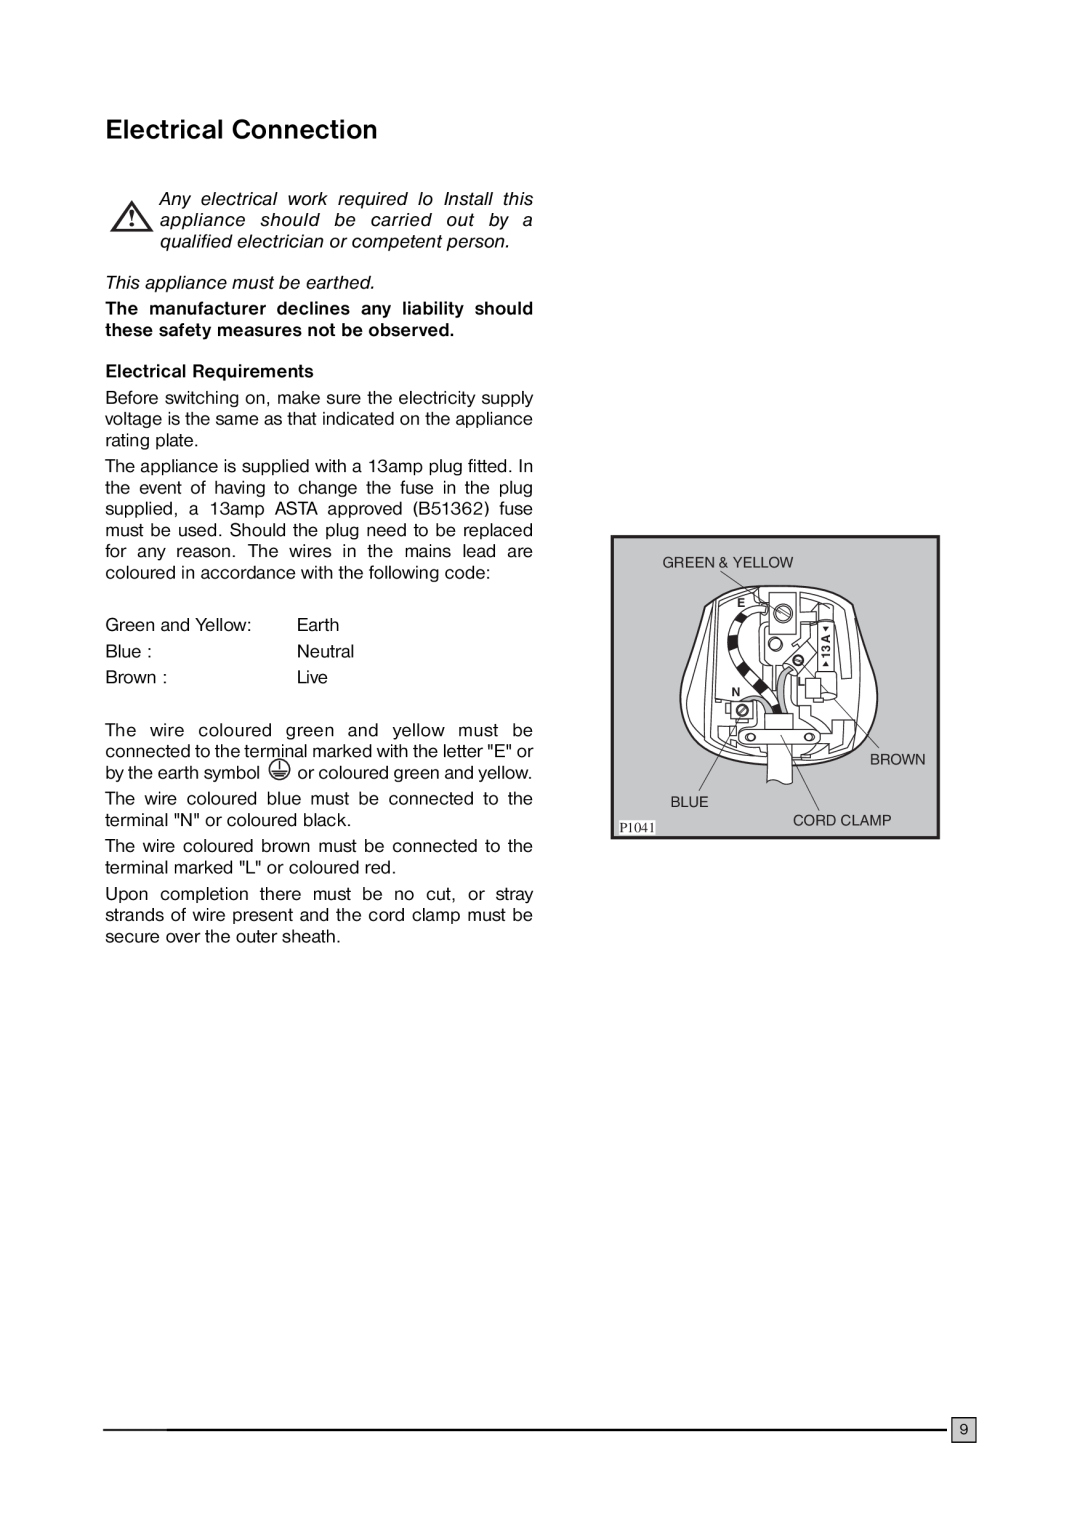 Zanussi ZFC103 installation manual Electrical Connection, Electrical Requirements 